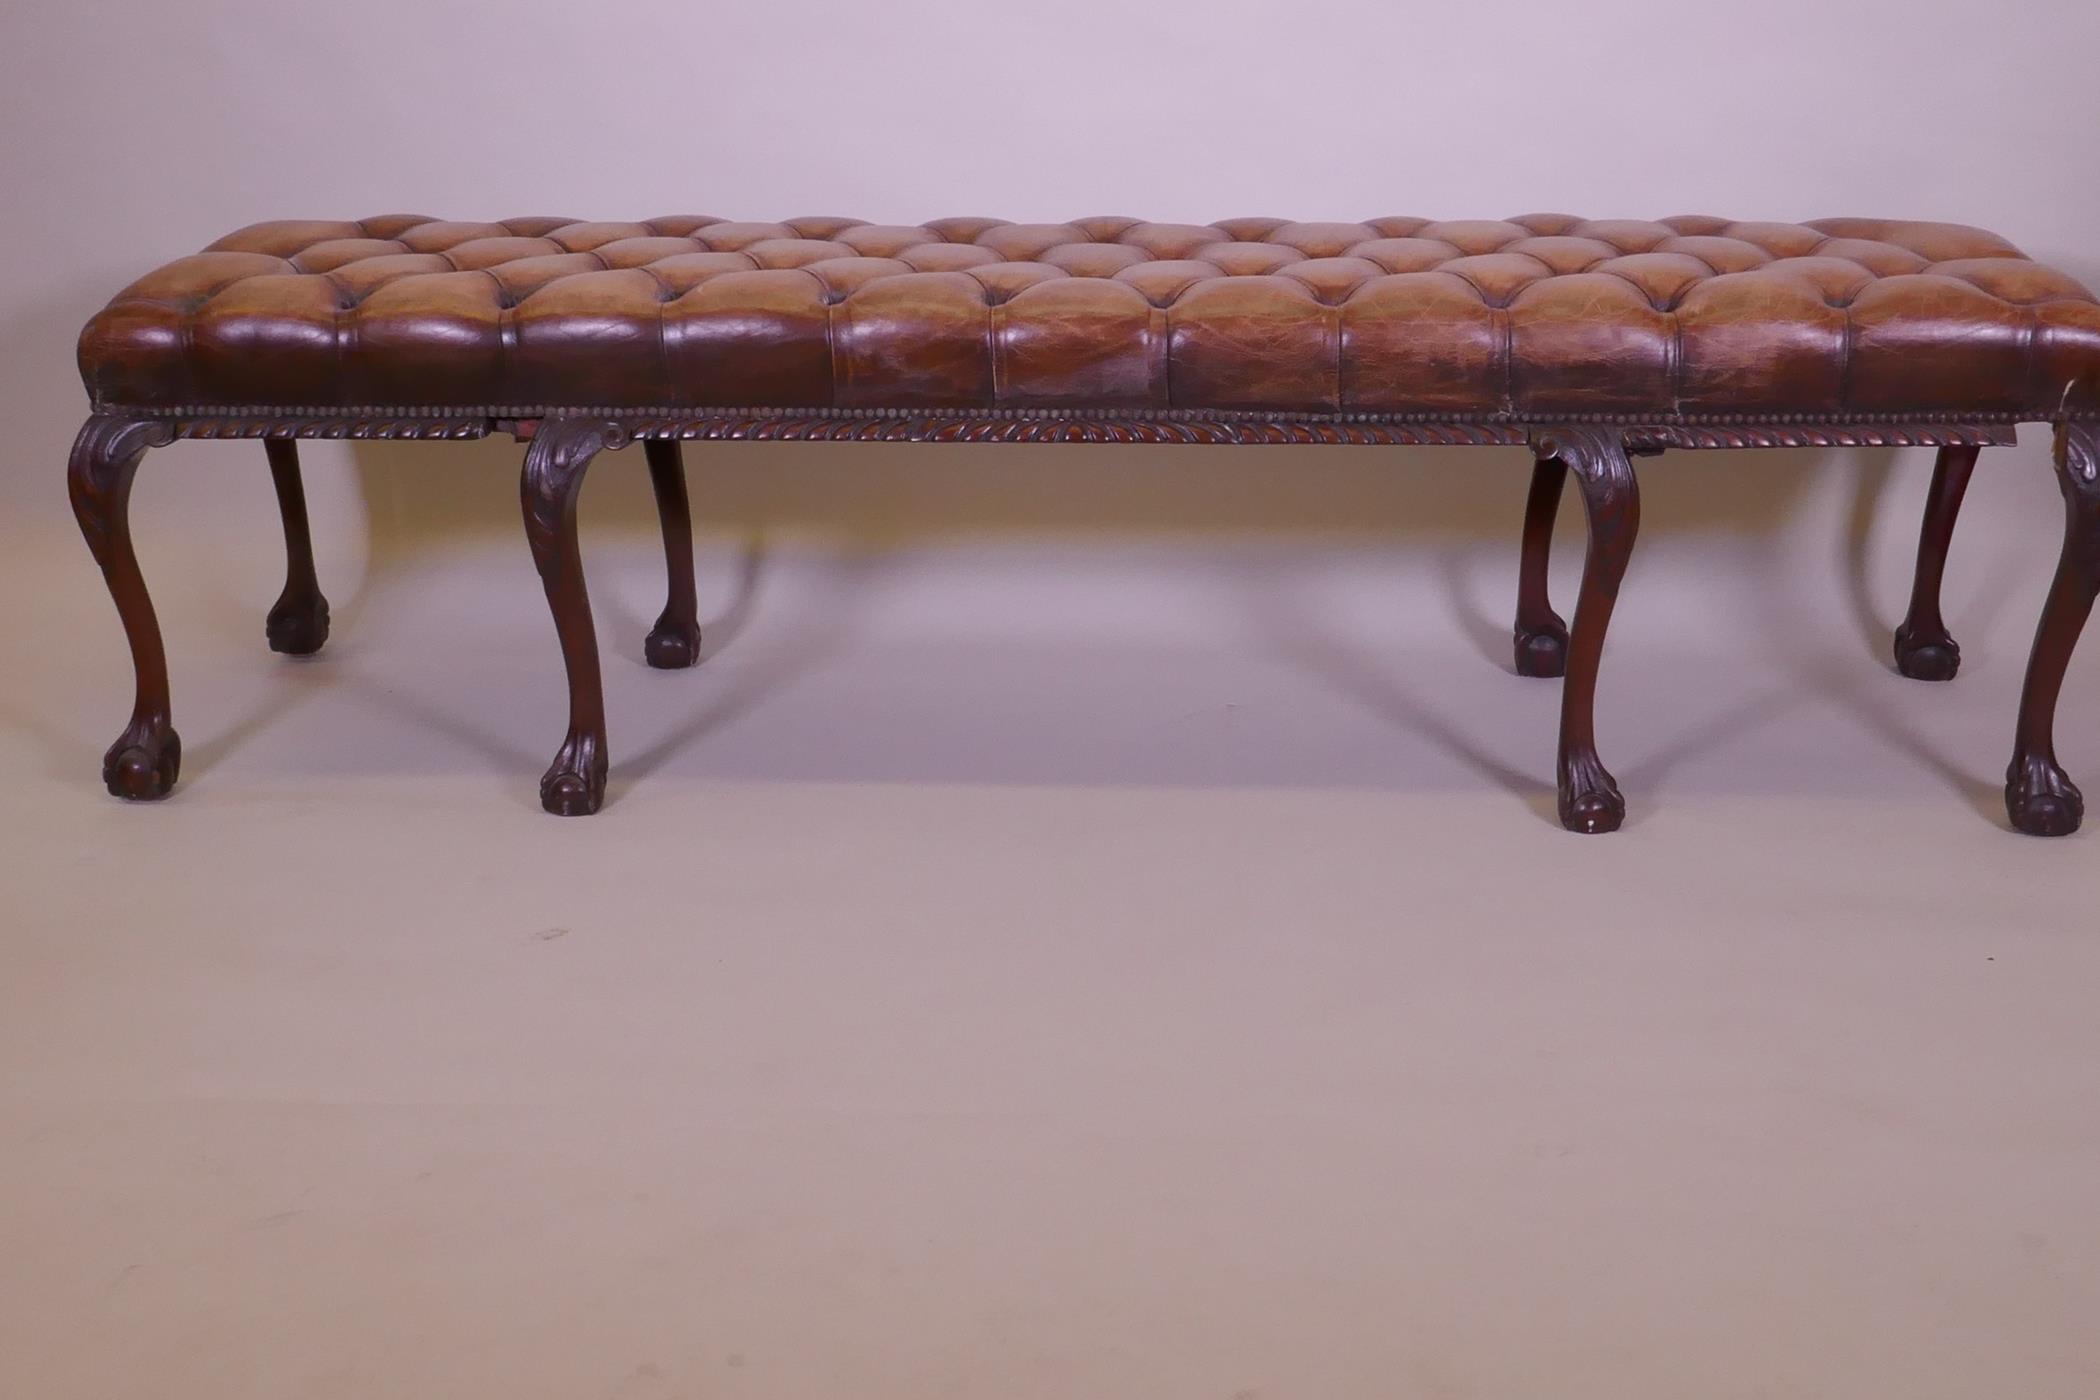 A mahogany bench raised on cabriole legs with claw and ball feet and a buttoned leather seat, 192 - Image 5 of 5